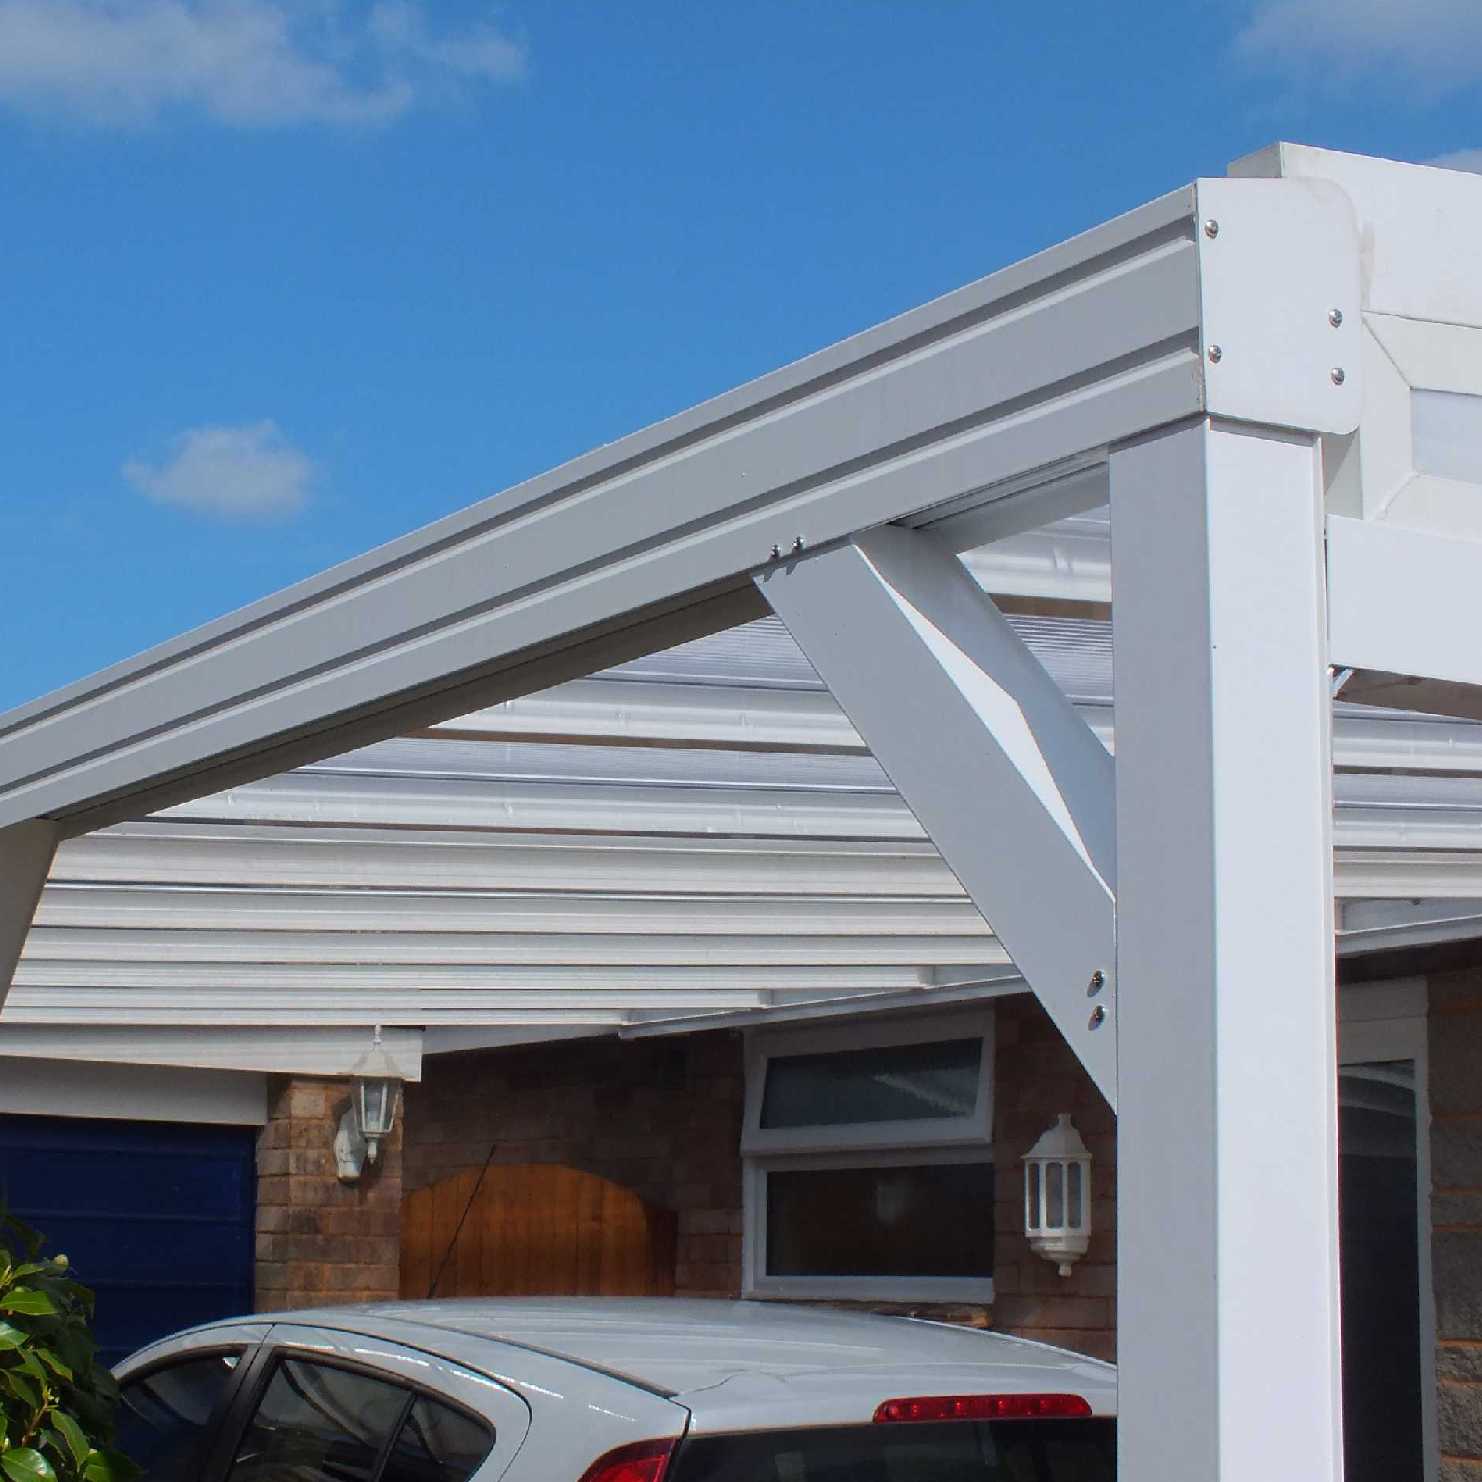 Great deals on Omega Smart Lean-To Canopy, White with 16mm Polycarbonate Glazing - 8.4m (W) x 1.5m (P), (4) Supporting Posts